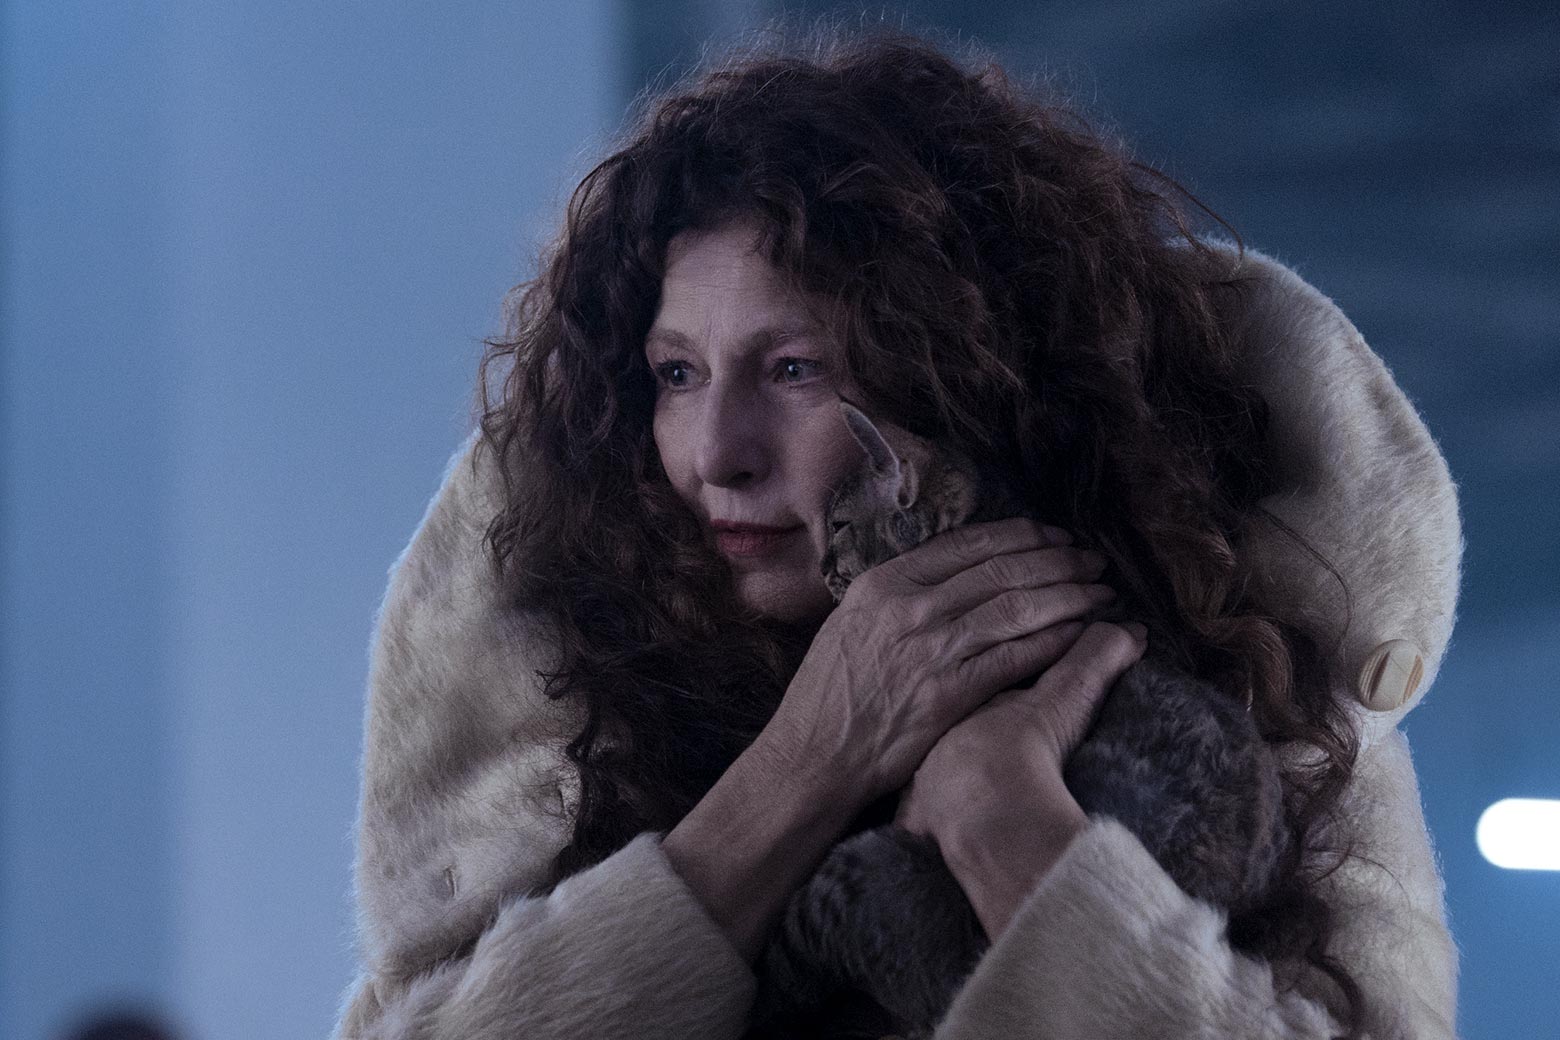 Catherine Keener, wearing a fur coat, holds a kitten to her face.